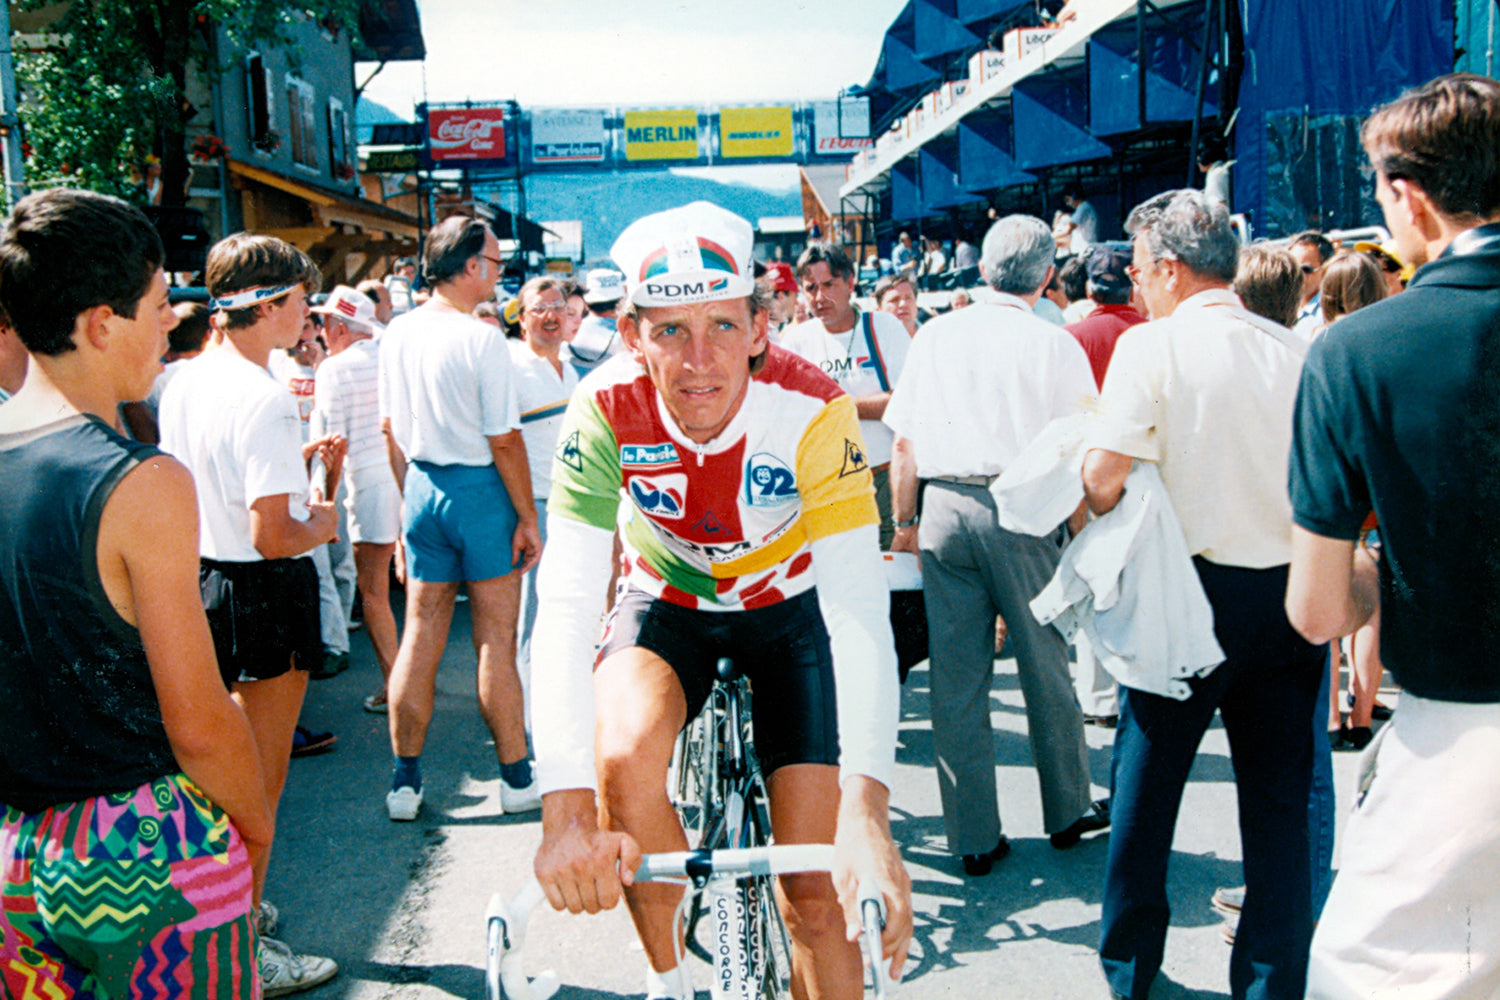 Steven Rooks (PDM) wearing the Combination jersey at the end of stage 10 Besançon to Morzine in the 1987 Tour de France. Photo: Fotoreporter Sirotti.